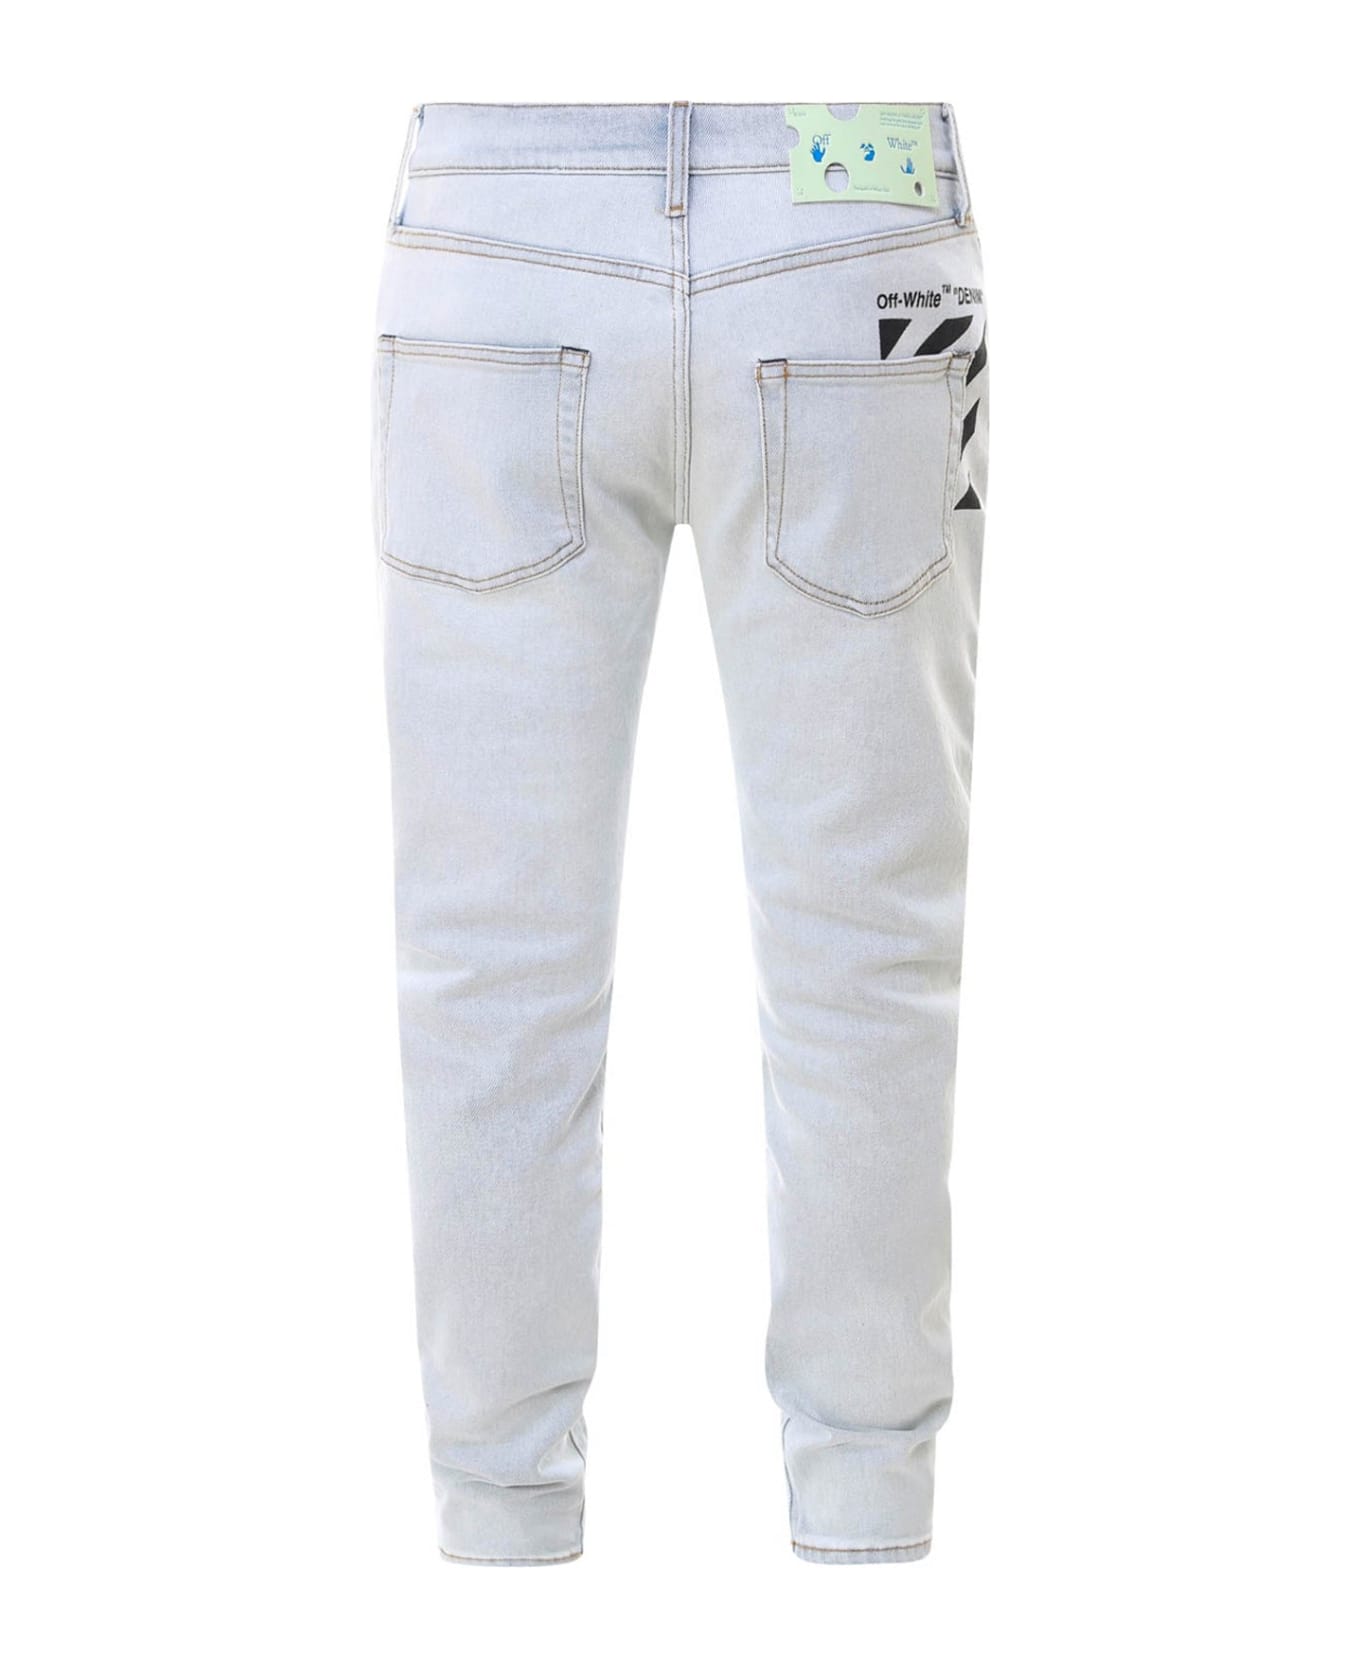 Off-White Skinny Jeans - Blue